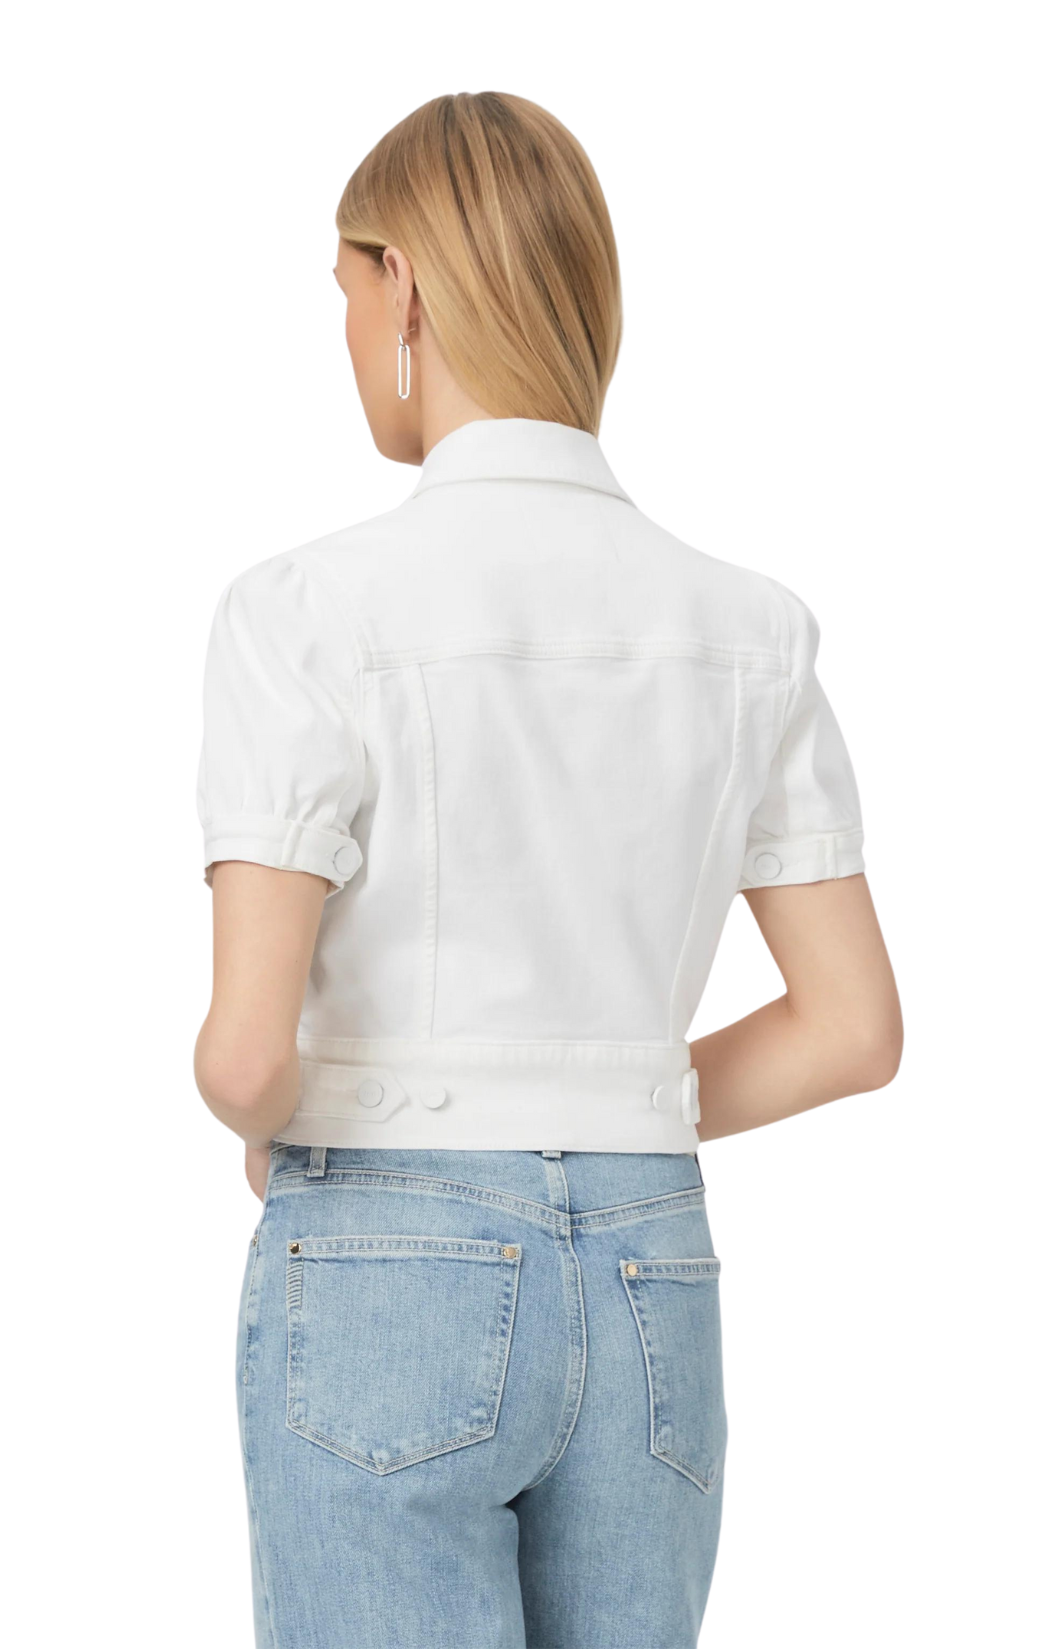 Introducing the Kendra Jacket by PAIGE. Crafted from white denim, it features a point collar, short puff sleeves, and chest pockets. Its cropped fit is both stylish and versatile. Made with cotton and elastane, this jacket is the perfect addition to any wardrobe.